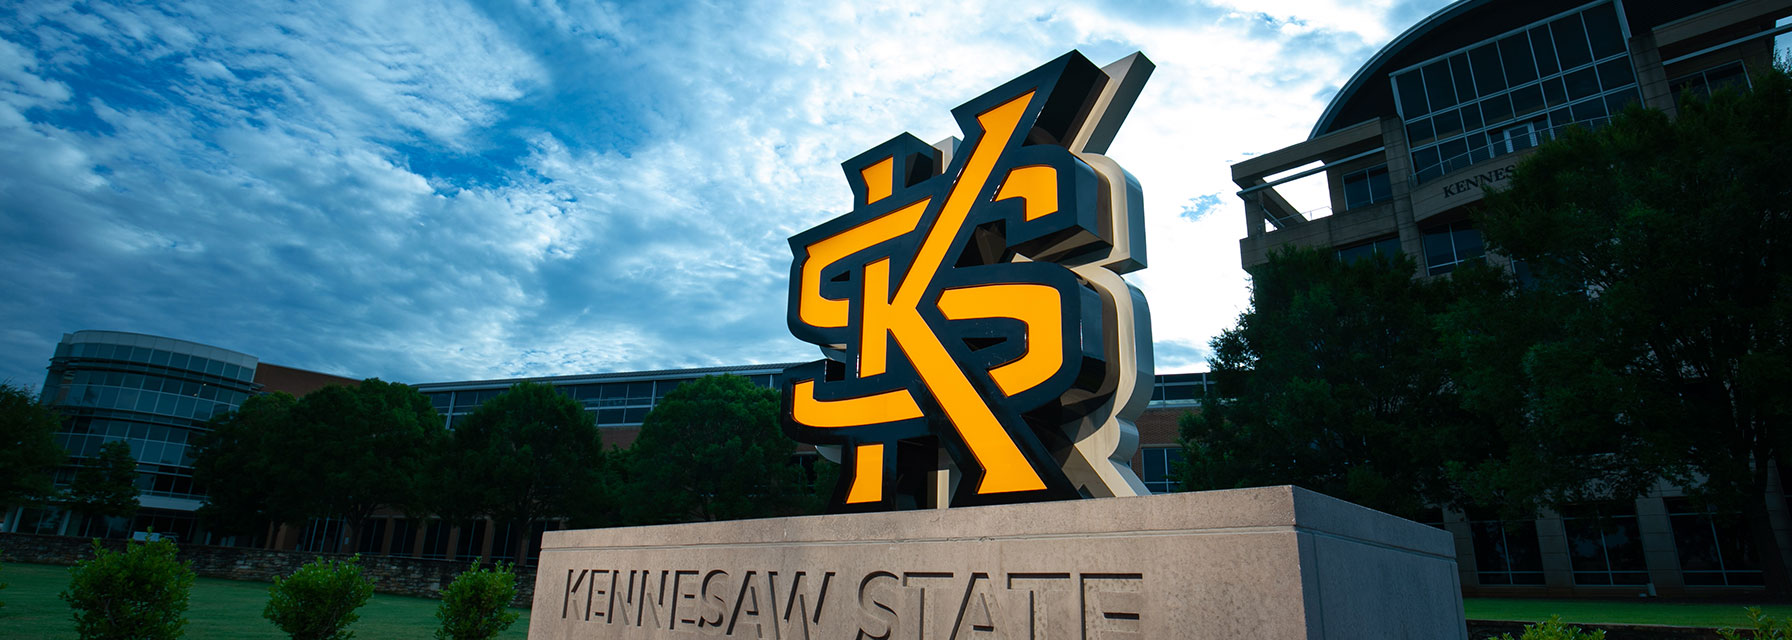 Kennesaw State statue on the Campus Green